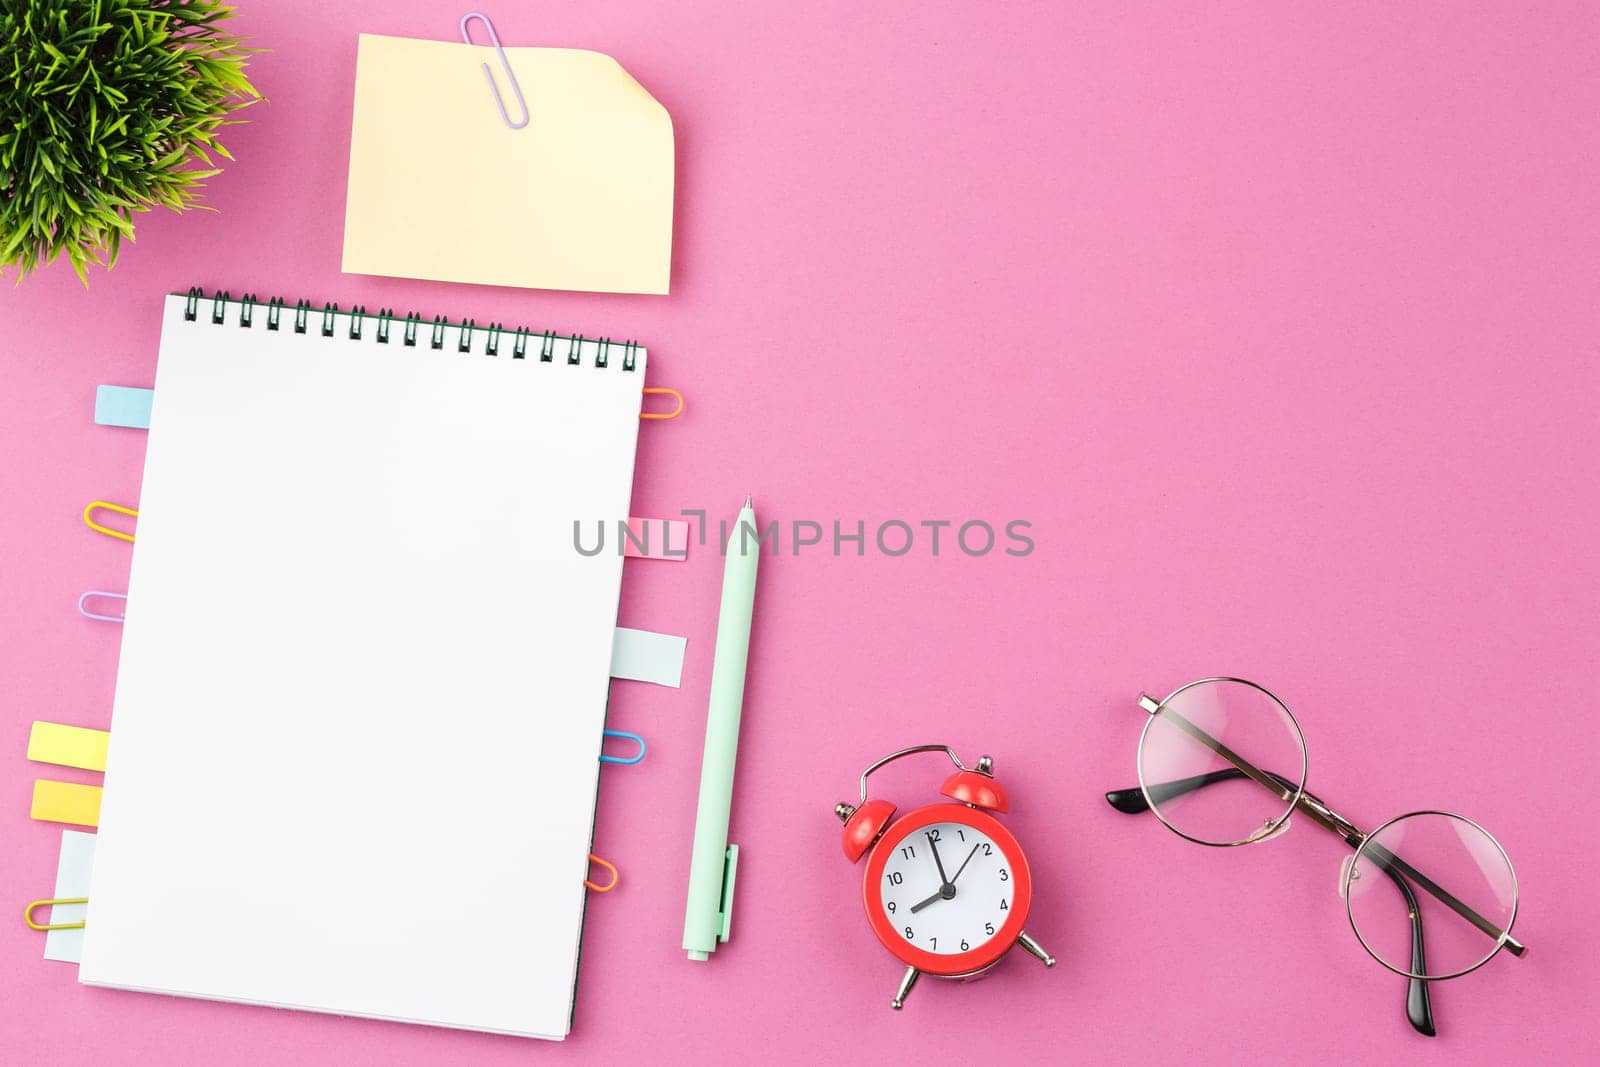 Open spiral notebook with bookmarks from paper clips and leaves for notes, pen, alarm clock, glasses and a flower in a pot on a pink background. Top view. Desktop office concept.